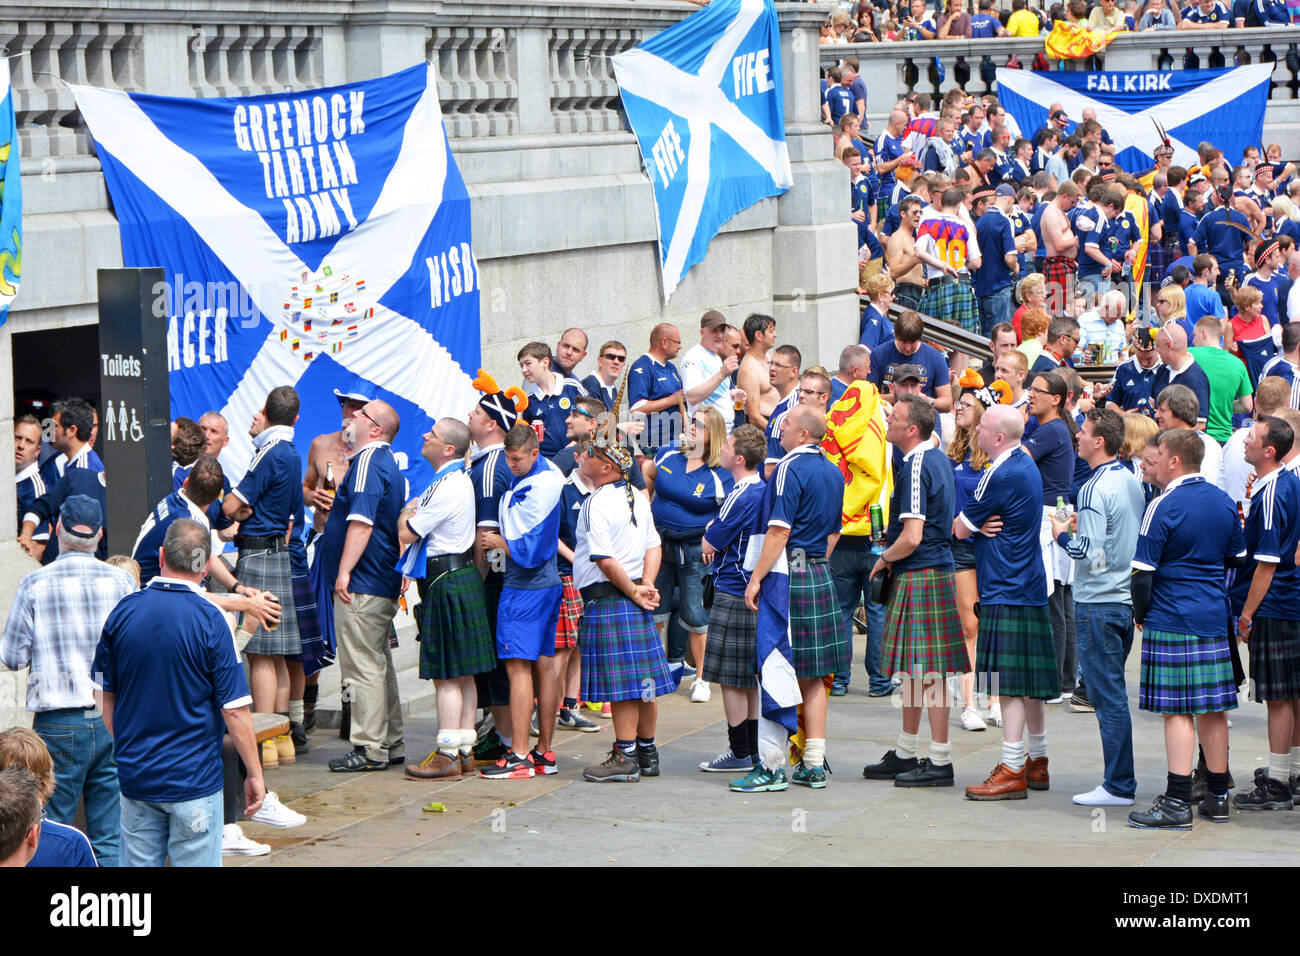 Banners & long queue of Scotland Tartan Army football fans in London for match queuing outside WC toilets in Trafalgar Square Westminster England UK Stock Photo